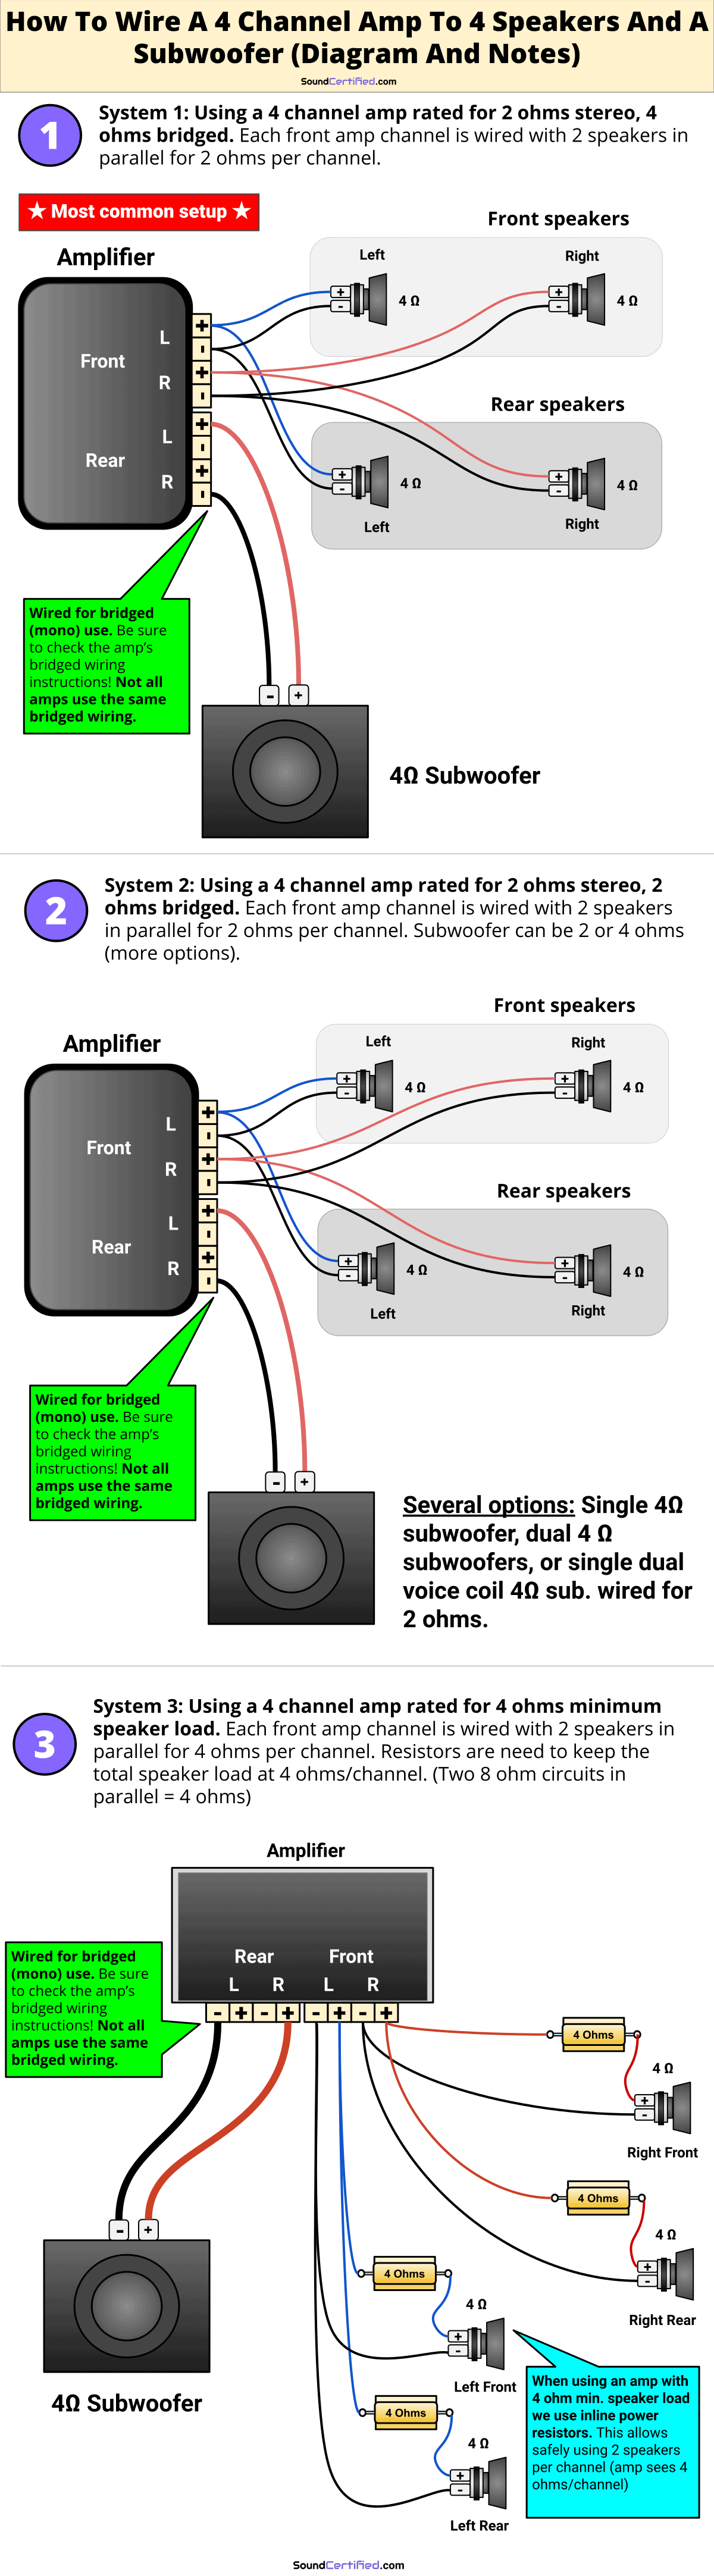 Detailed diagram for how to wire a 4 channel amp to 4 speakers and a subwoofer